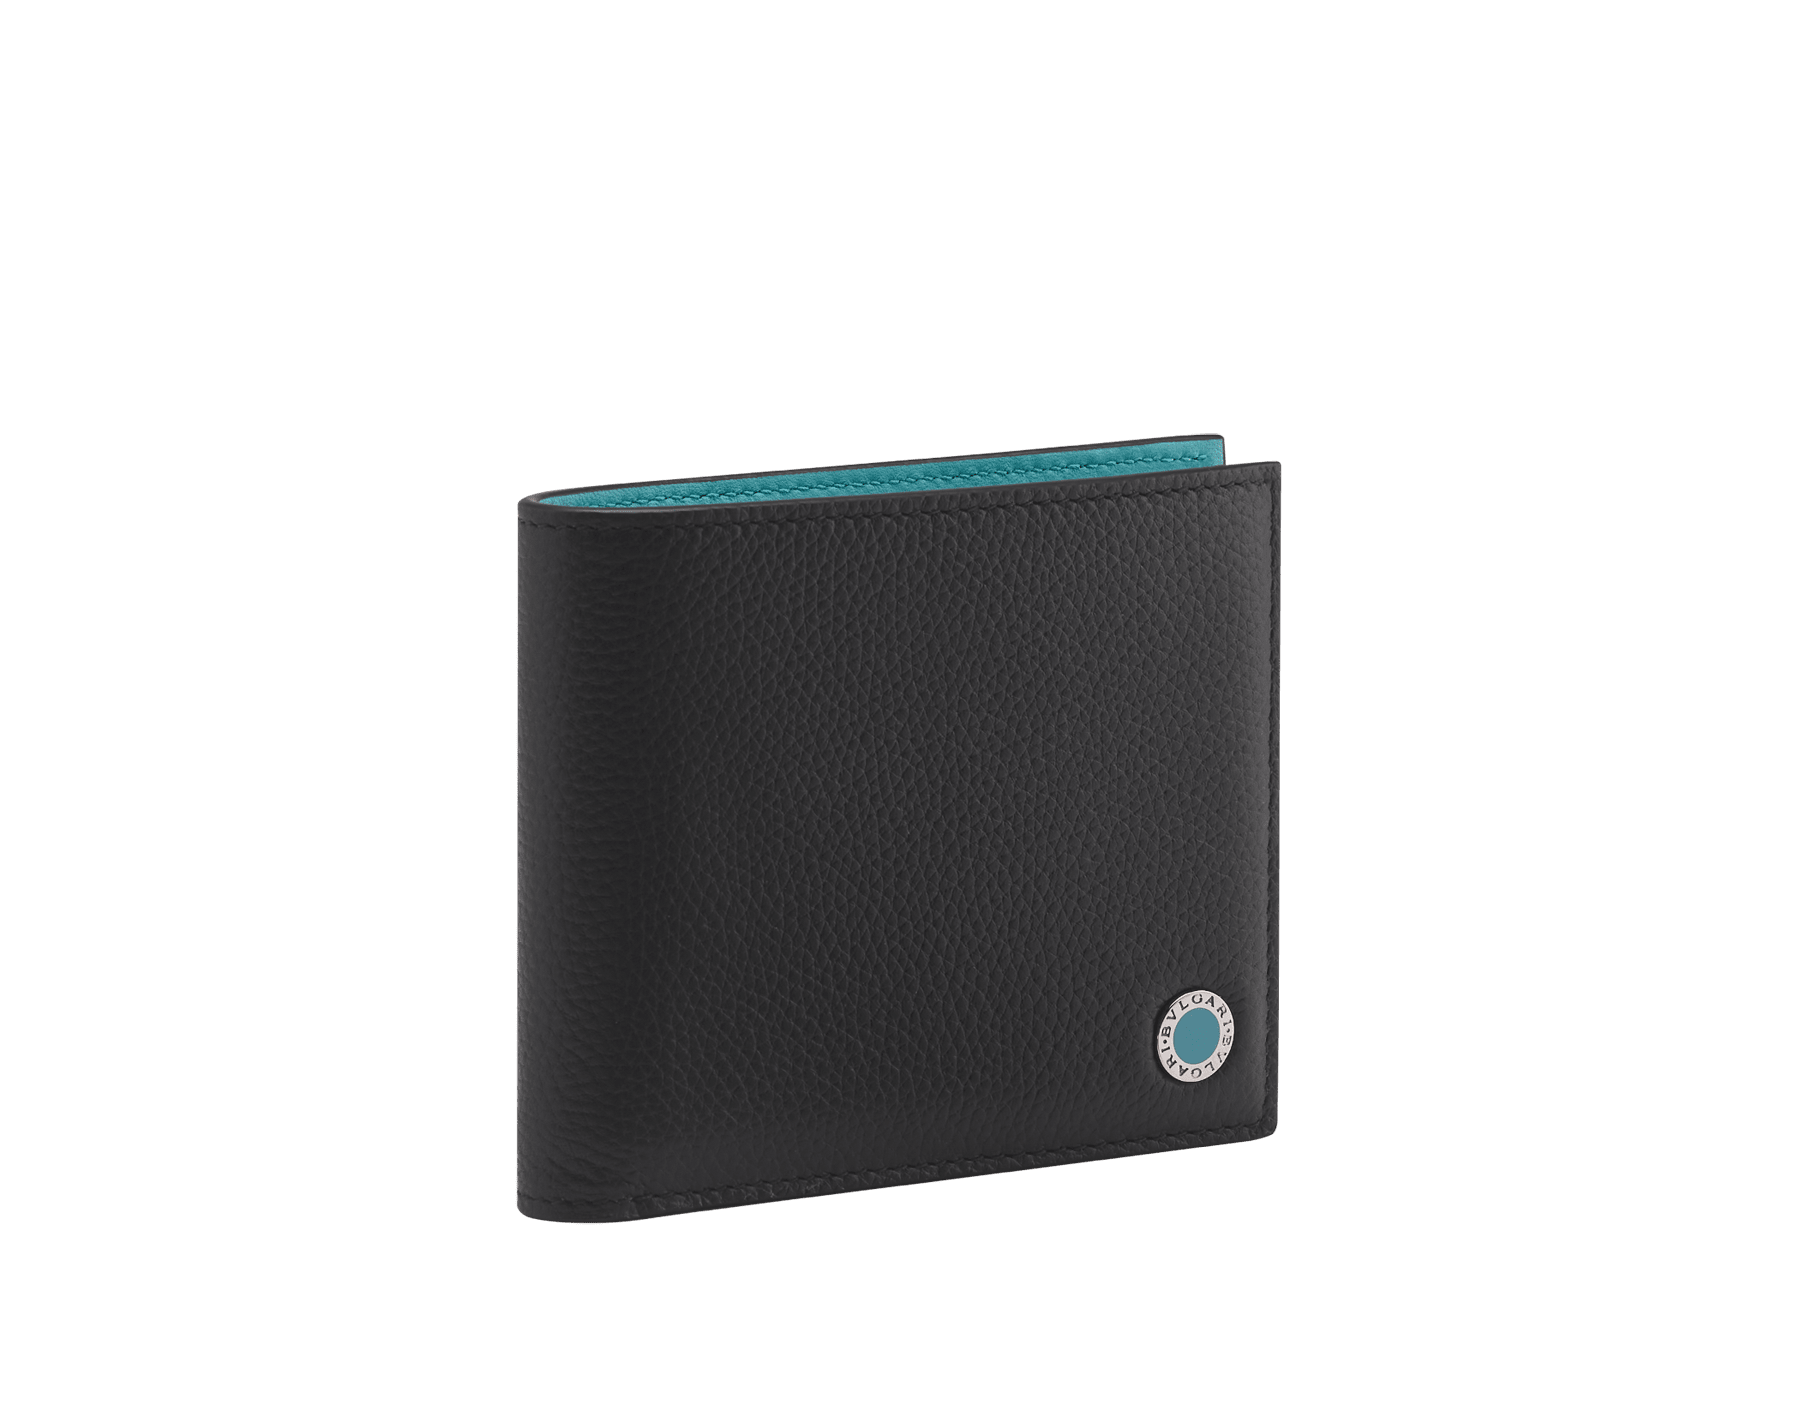 BULGARI BULGARI Man hipster compact wallet in soft, denim sapphire blue full-grain calf leather with tropical turquoise light blue nappa leather interior. Iconic palladium plated-brass embellishment with tropical turquoise light blue enamel, and folded closure. BBM-WLT-HIPST-8C-SFGCL image 1